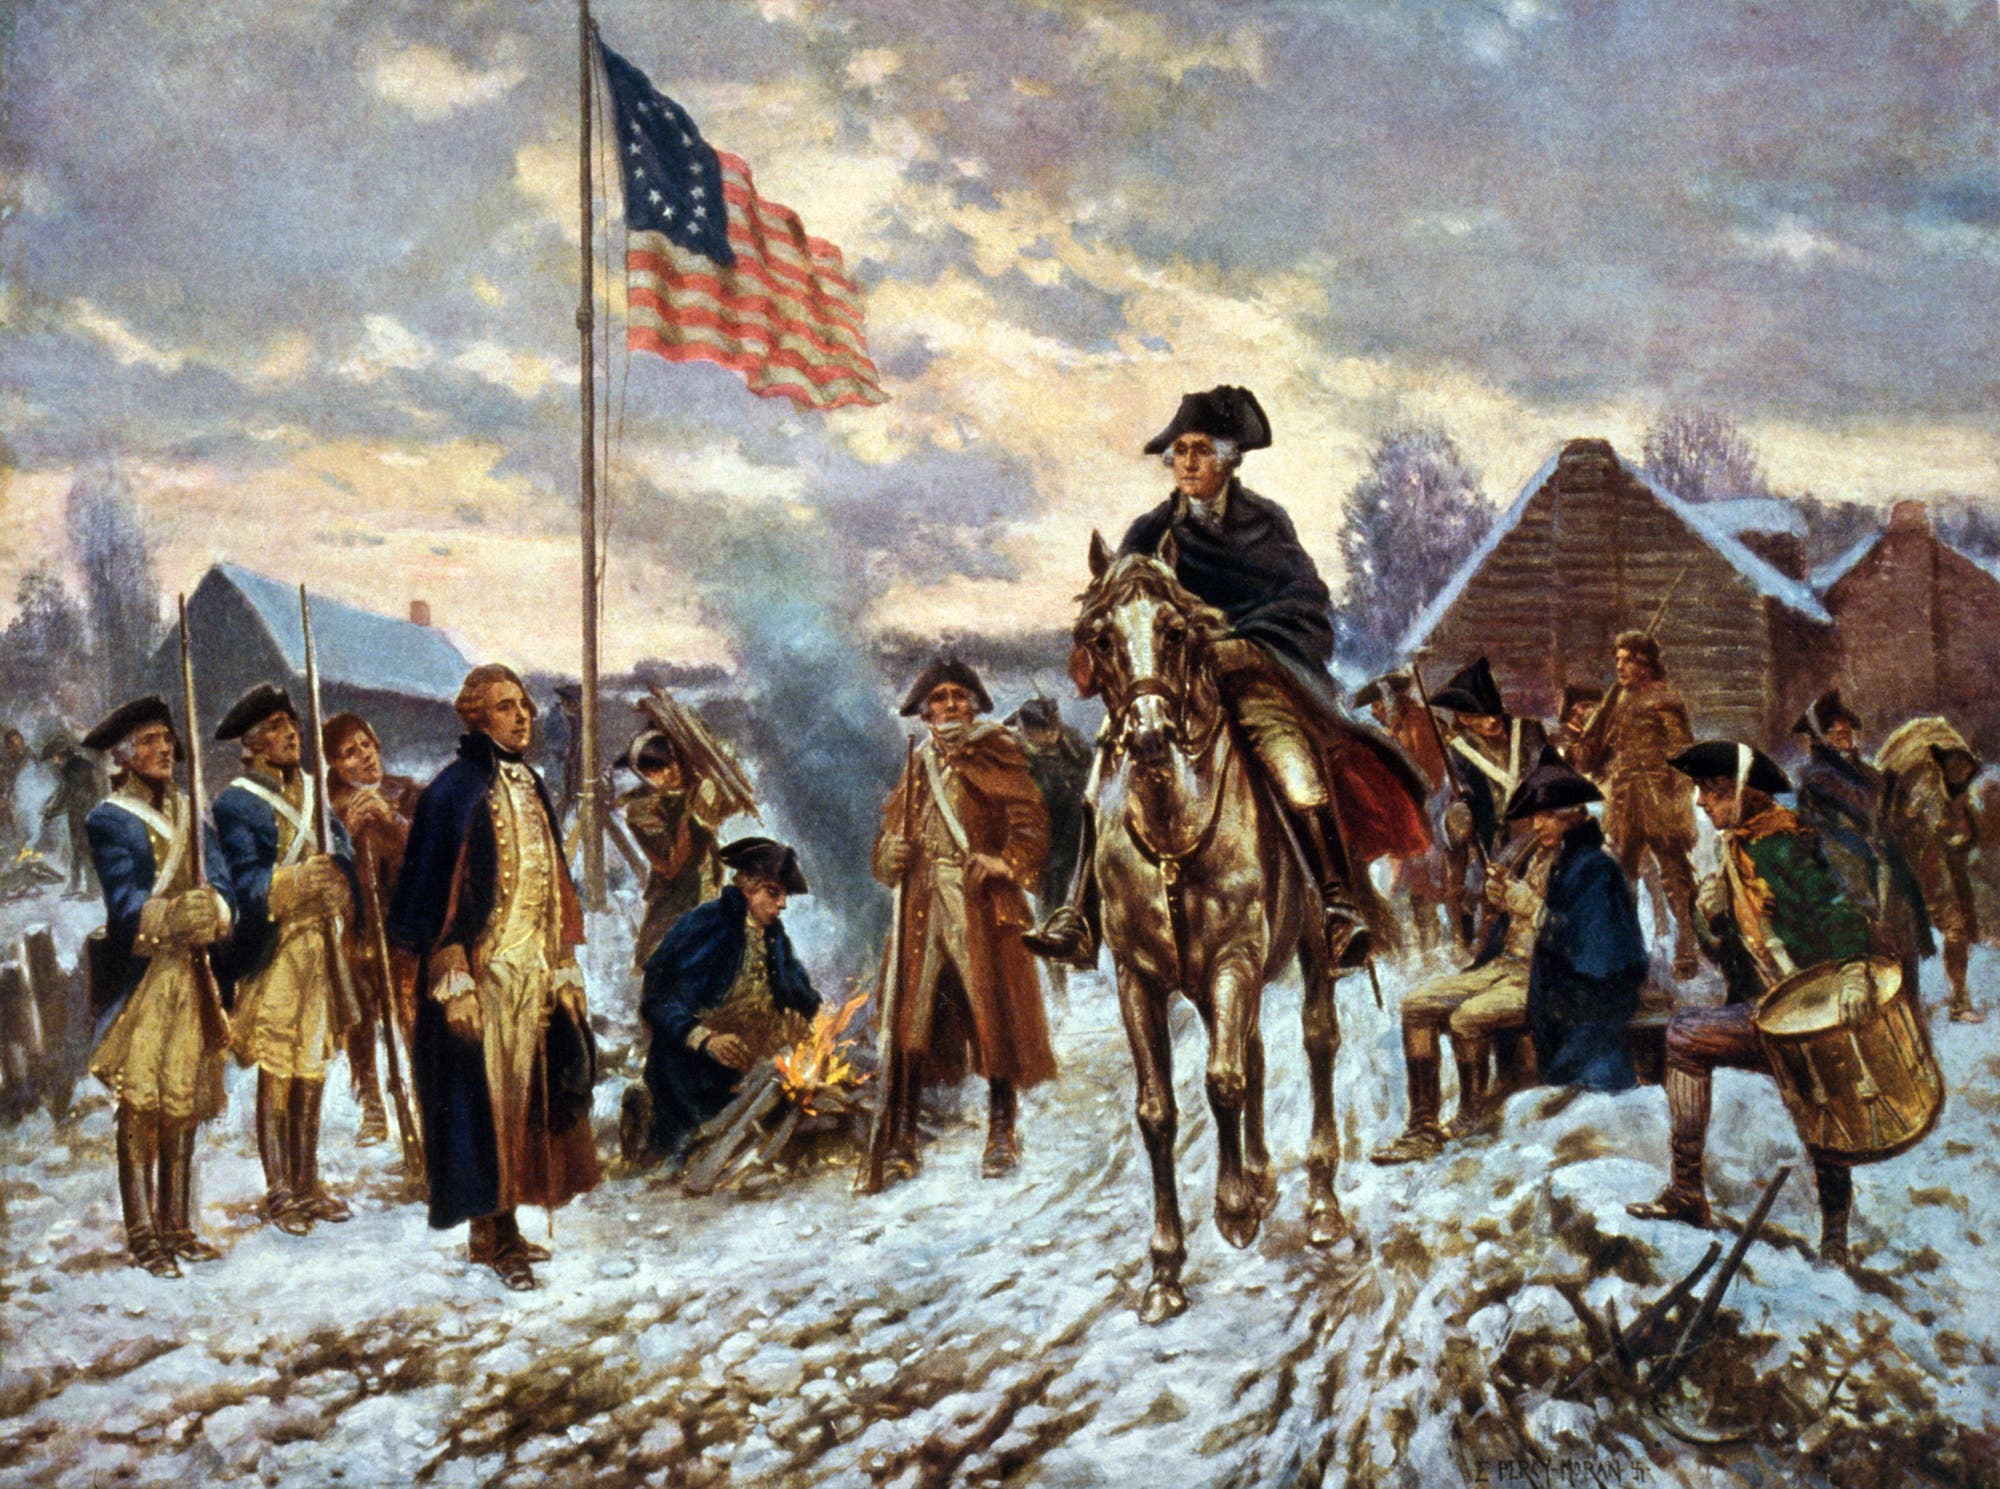 Washington in Valley Forge